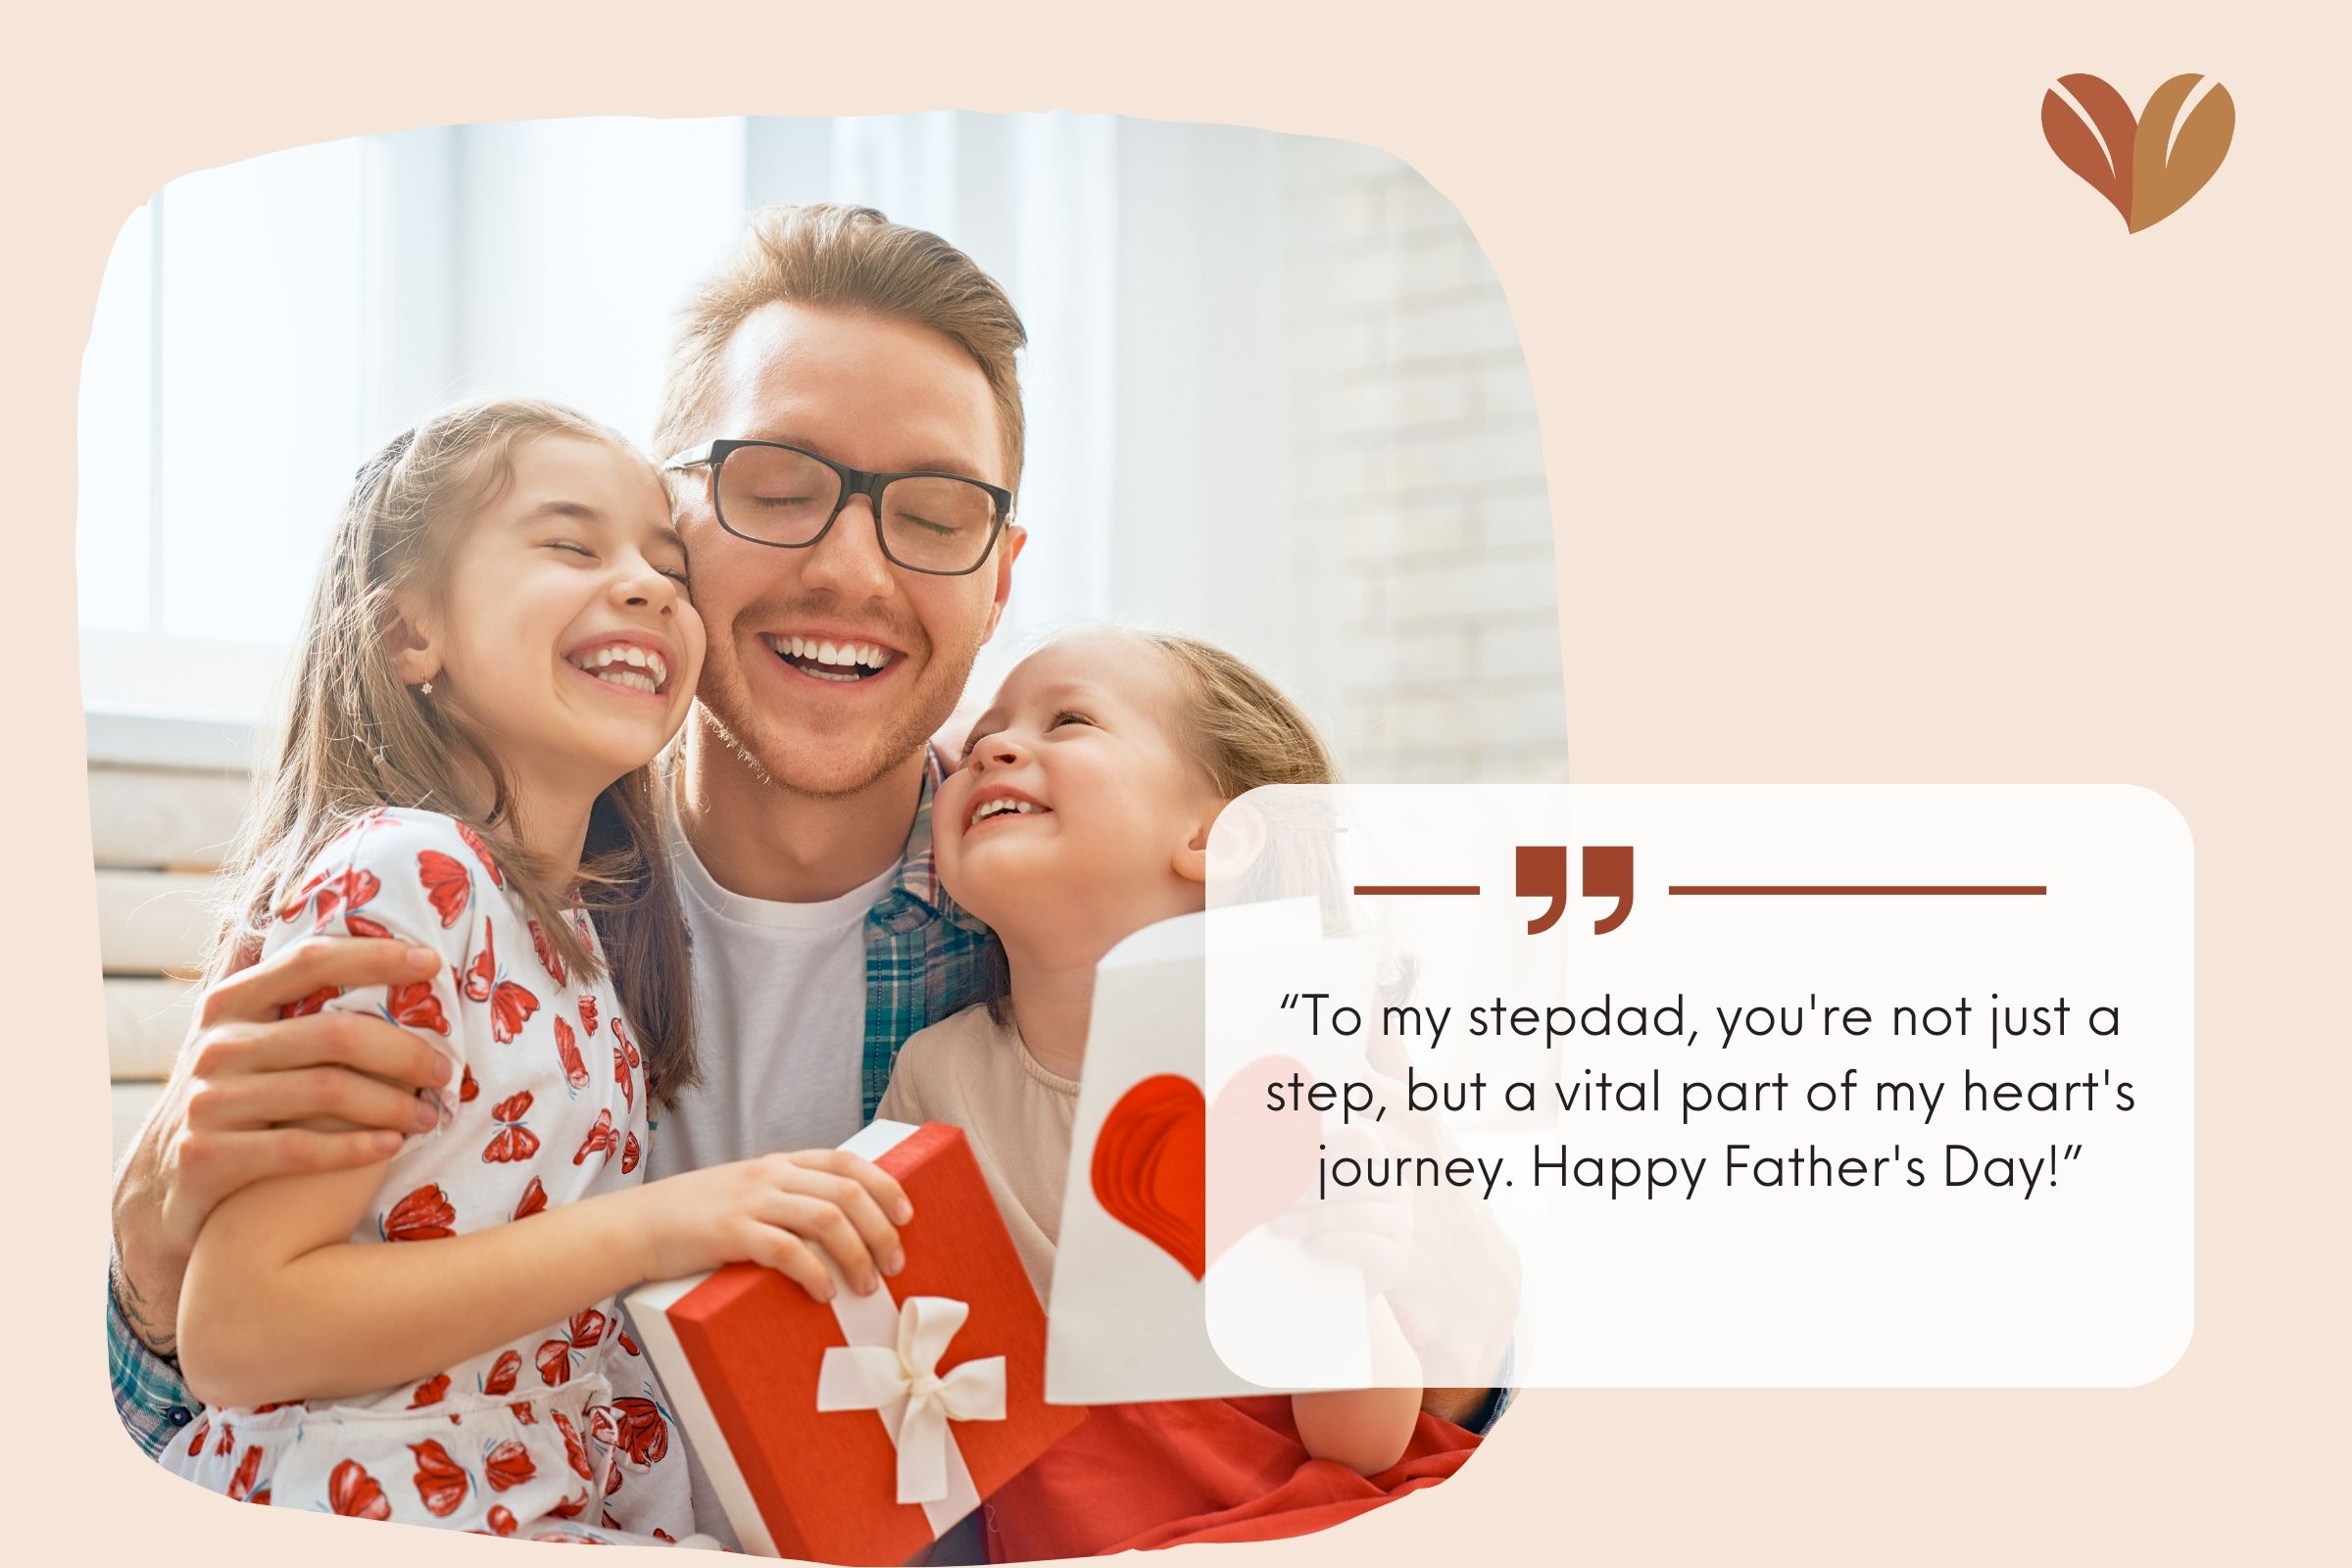 Stepdad Appreciation Quotes On Father's Day